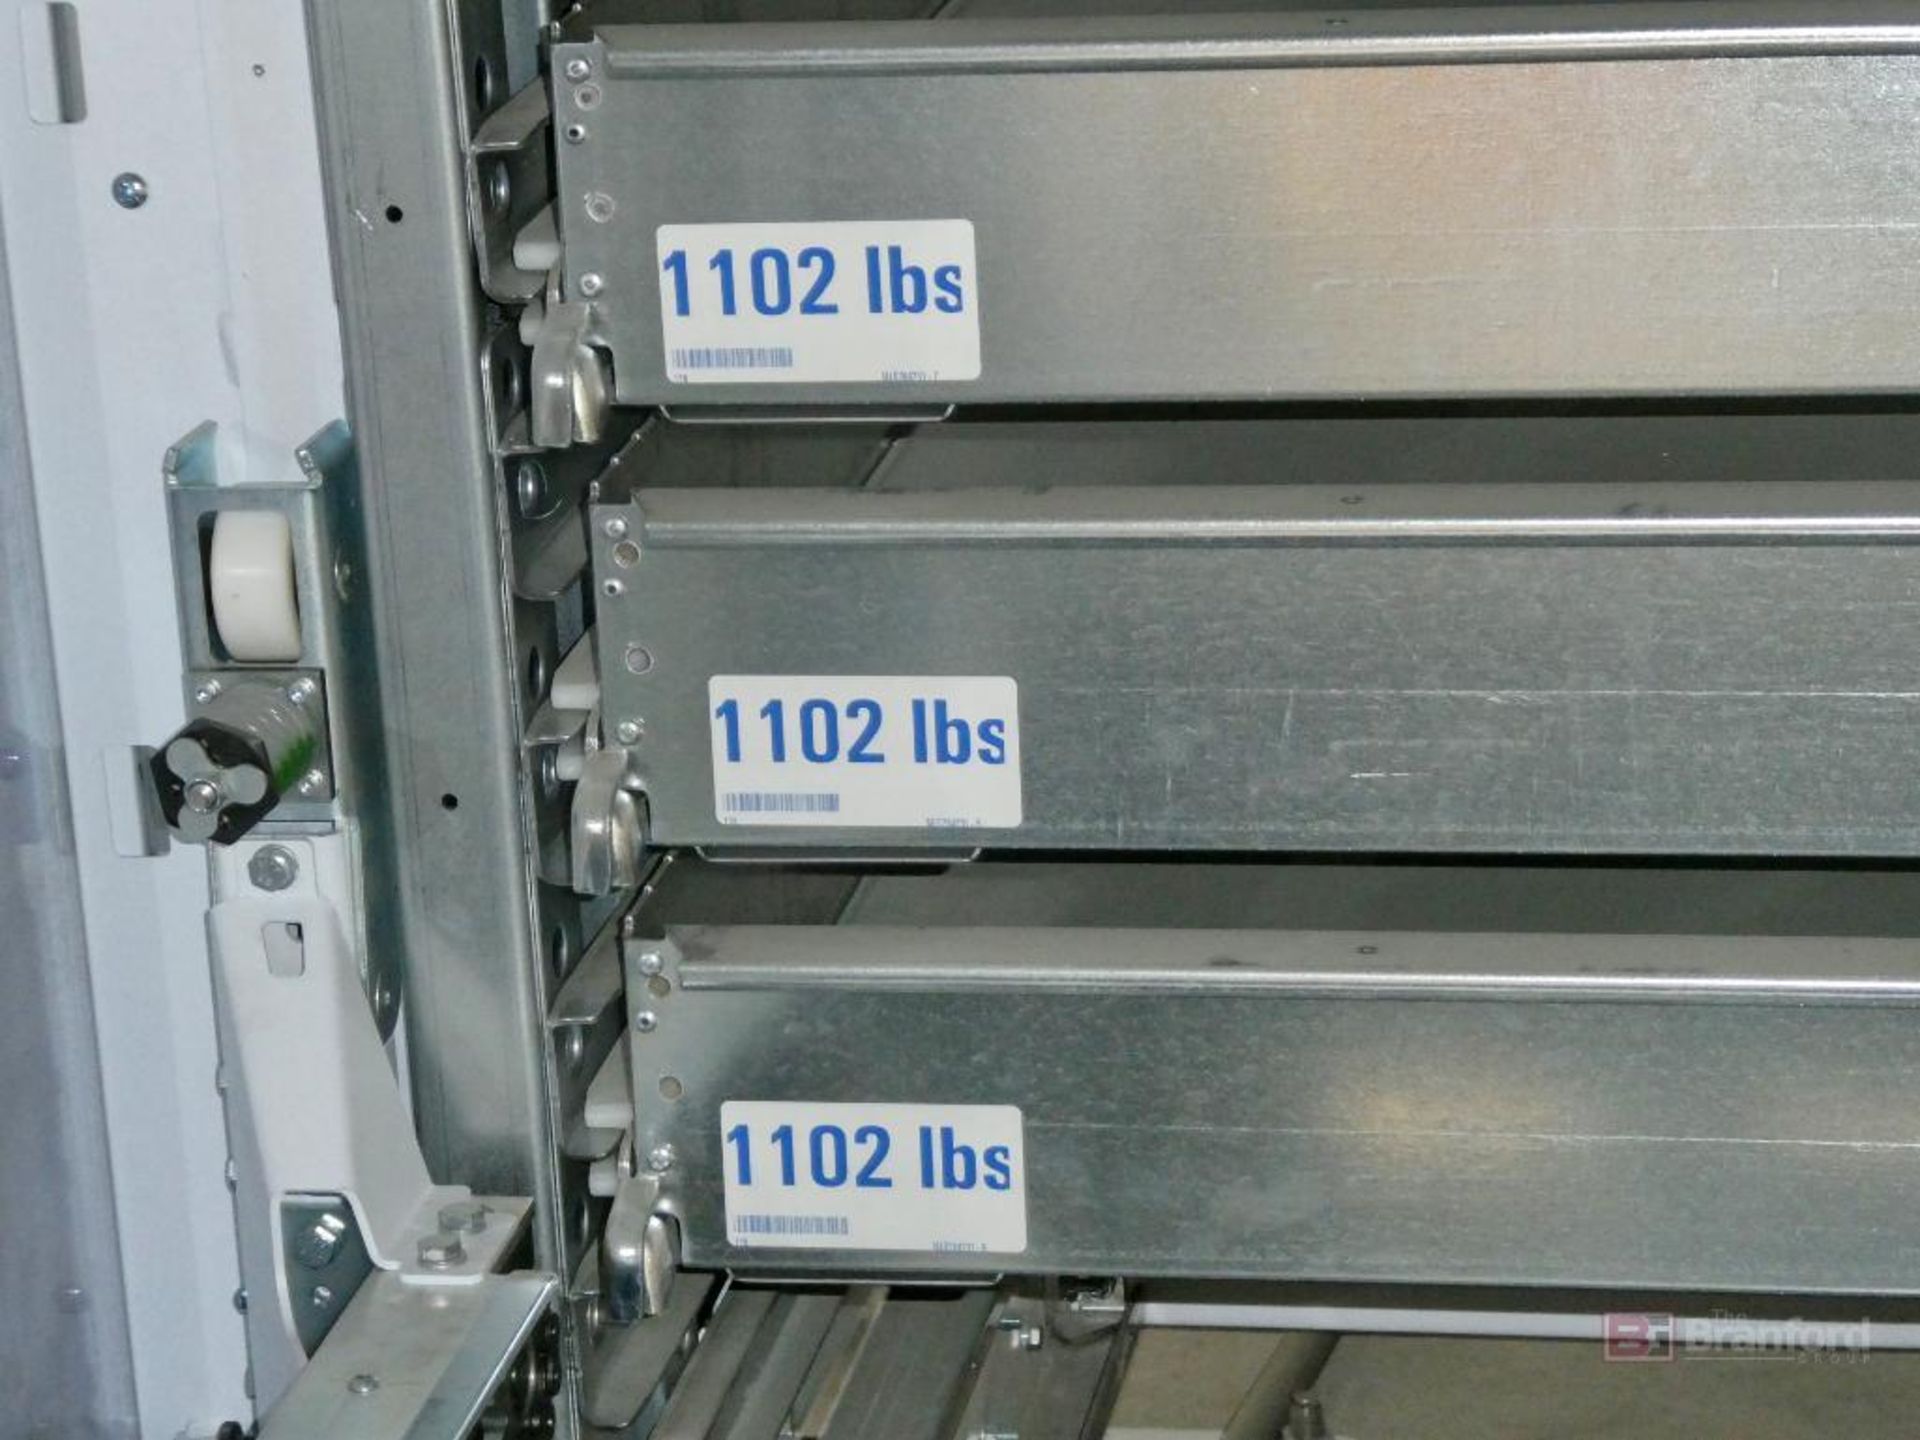 2021 Modula Lift Model ML50D, Automated Vertical Carousel Storage System - Image 7 of 10